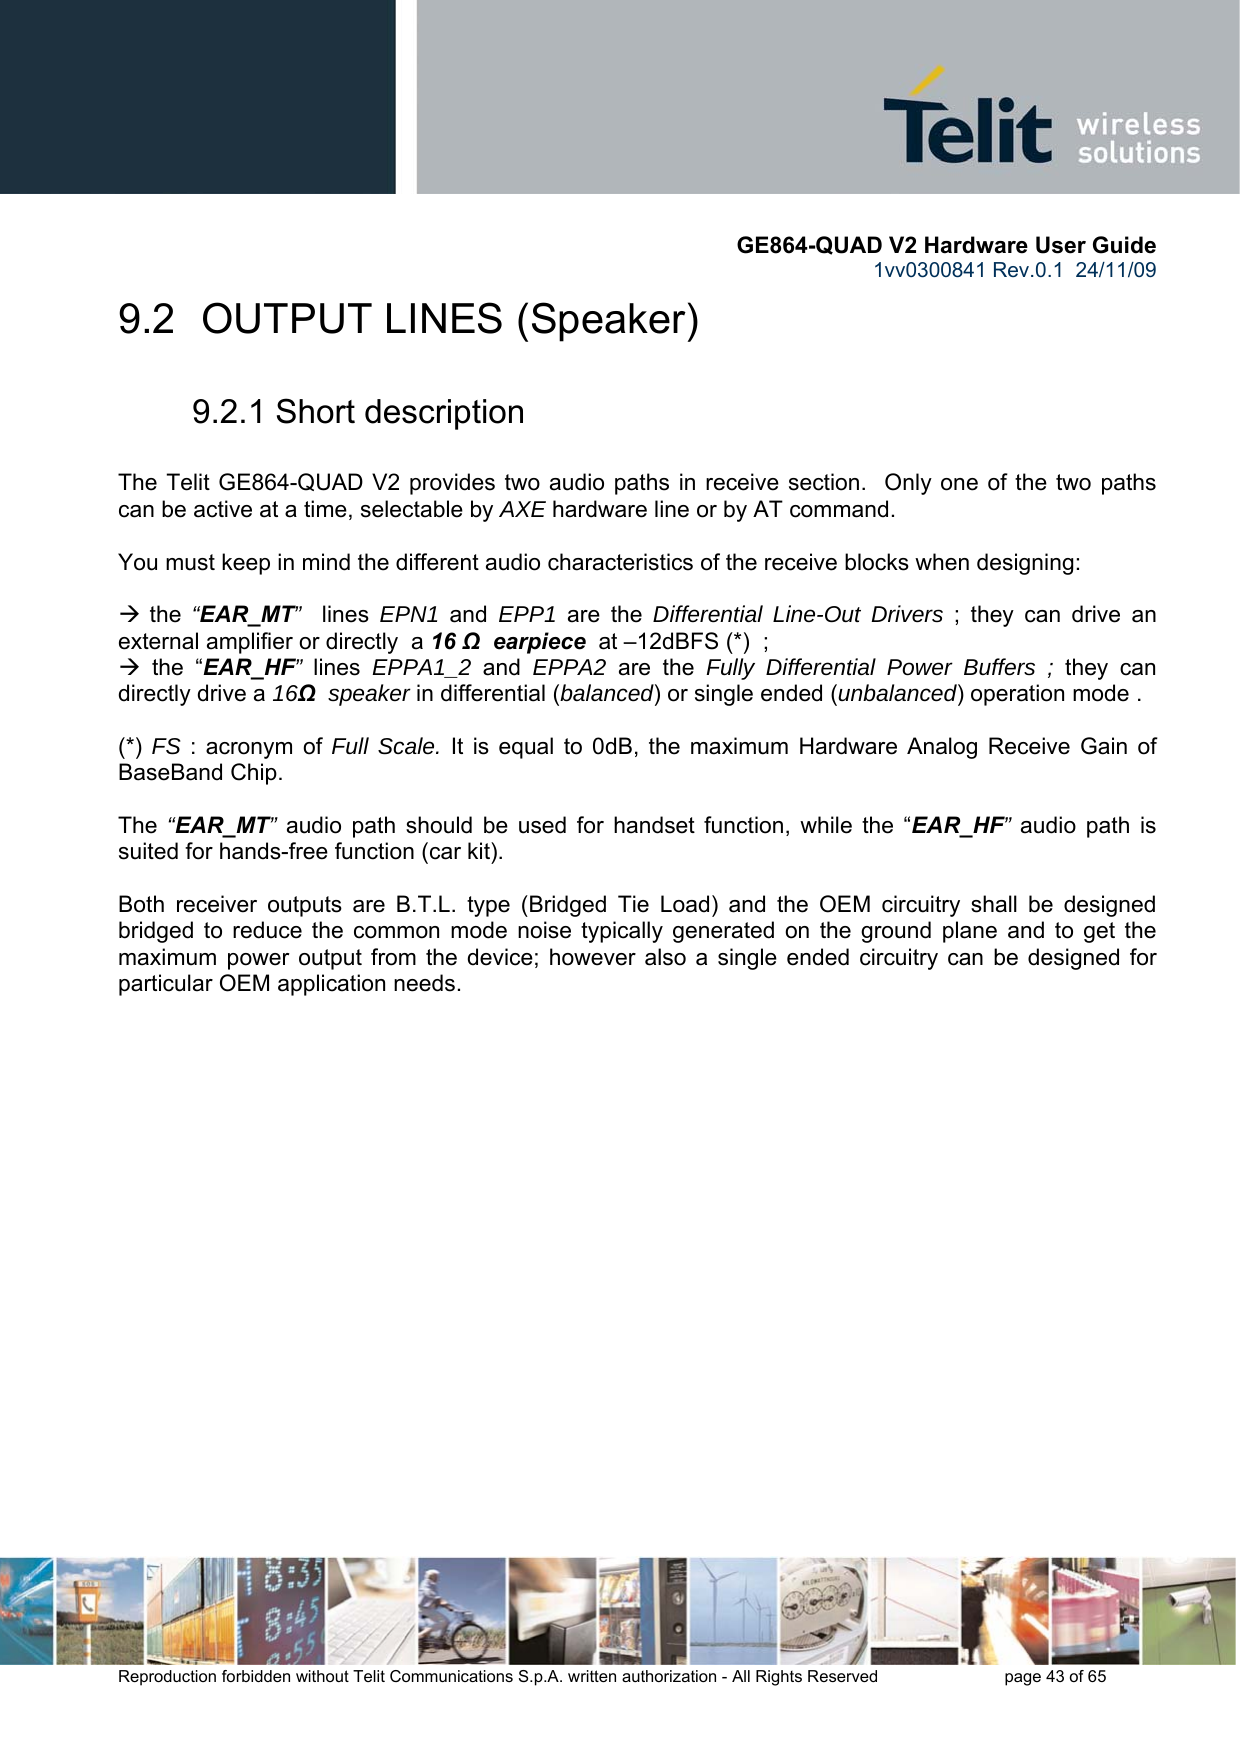       GE864-QUAD V2 Hardware User Guide 1vv0300841 Rev.0.1  24/11/09      Reproduction forbidden without Telit Communications S.p.A. written authorization - All Rights Reserved    page 43 of 65  9.2  OUTPUT LINES (Speaker)  9.2.1 Short description  The Telit GE864-QUAD V2 provides two audio paths in receive section.  Only one of the two paths can be active at a time, selectable by AXE hardware line or by AT command.   You must keep in mind the different audio characteristics of the receive blocks when designing:  Æ the  “EAR_MT”  lines  EPN1  and  EPP1 are the Differential Line-Out Drivers ; they can drive an external amplifier or directly  a 16 Ω  earpiece  at –12dBFS (*)  ;  Æ the “EAR_HF”  lines  EPPA1_2 and EPPA2 are the Fully Differential Power Buffers ; they can directly drive a 16Ω  speaker in differential (balanced) or single ended (unbalanced) operation mode .  (*)  FS : acronym of Full Scale. It is equal to 0dB, the maximum Hardware Analog Receive Gain of BaseBand Chip.  The  “EAR_MT” audio path should be used for handset function, while the “EAR_HF” audio path is suited for hands-free function (car kit).  Both receiver outputs are B.T.L. type (Bridged Tie Load) and the OEM circuitry shall be designed bridged to reduce the common mode noise typically generated on the ground plane and to get the maximum power output from the device; however also a single ended circuitry can be designed for particular OEM application needs.  